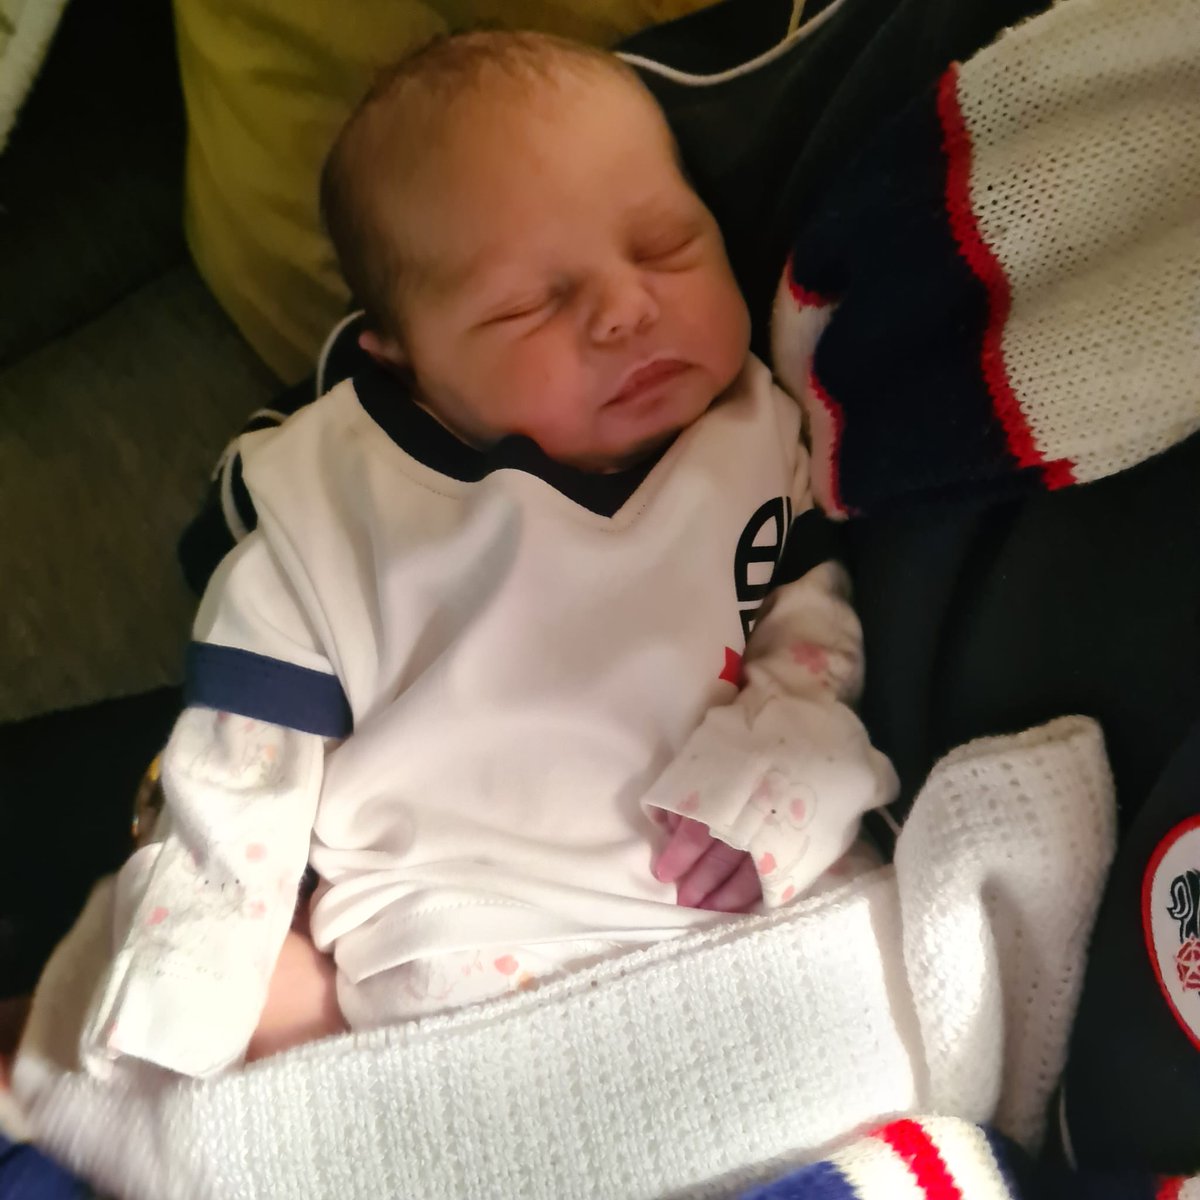 Watching the match with what could be the Wanderers newest supporter, my 4 day old daughter, Felicity 😊 6th (maybe 7th generation) of my family to support @OfficialBWFC Wearing her new shirt and one of her Great Grandma Elieen's scarfs. #BWFC #BoltonWanderers #Football